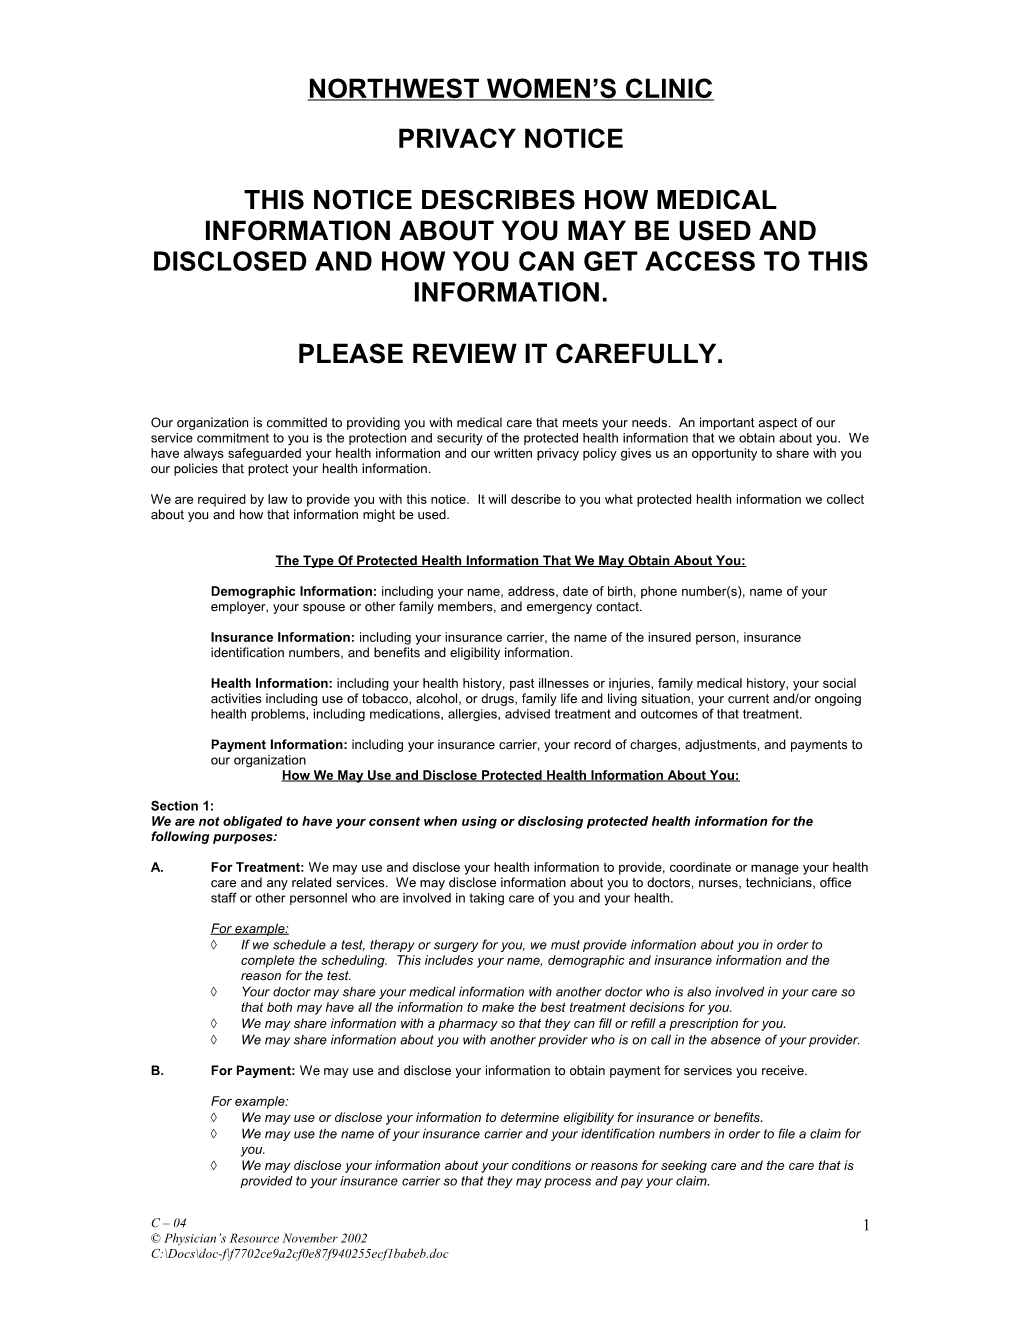 Notice of Patient Rights